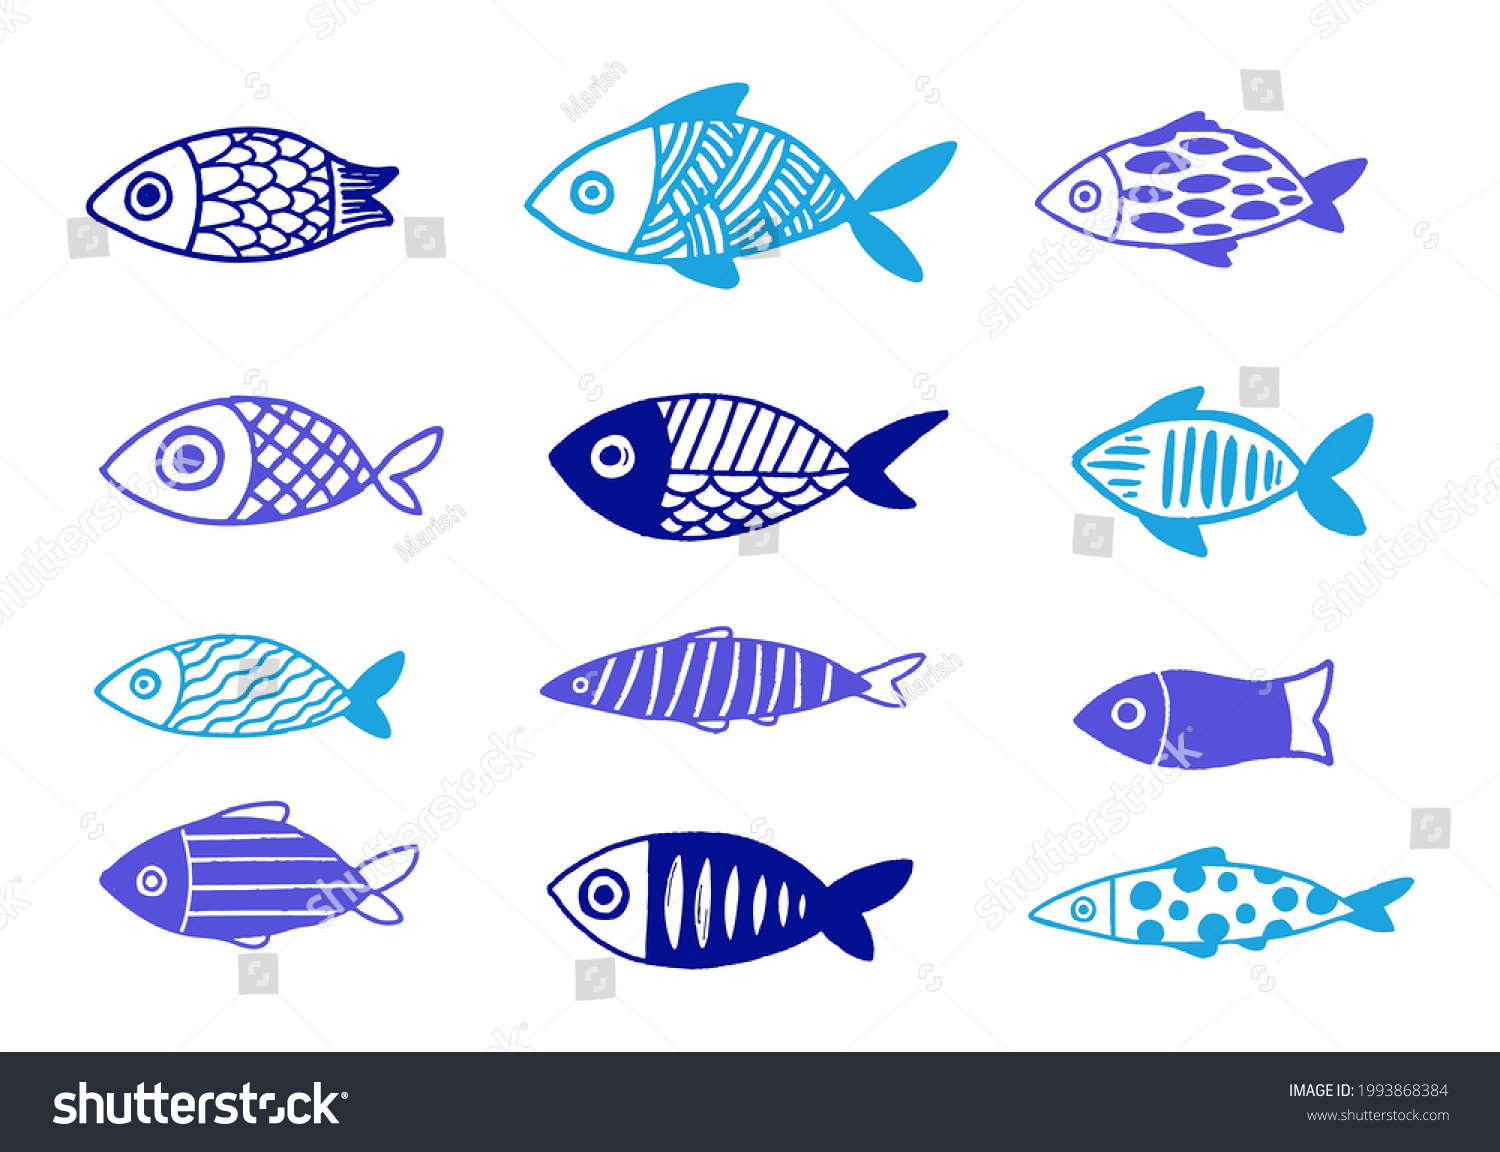 SVG of Greek fish, collection of hand drawn illustrations. Blue traditional fish symbols and icons svg